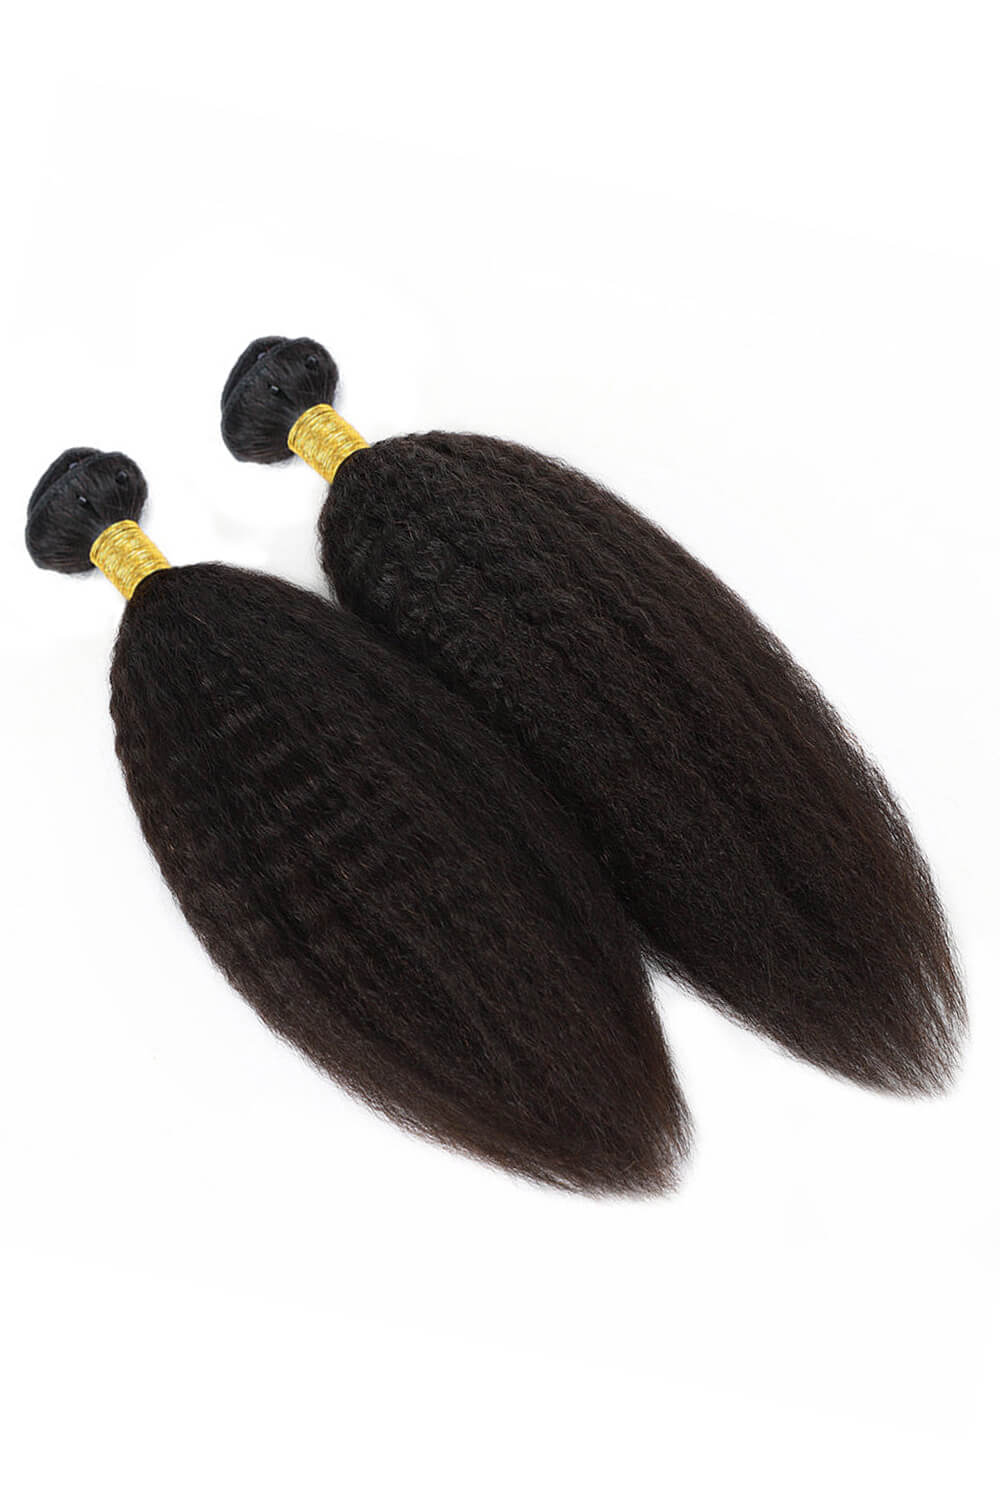 weft-hair-extensions-with-microbeads-kinky-curly-black-virgin-hair-1